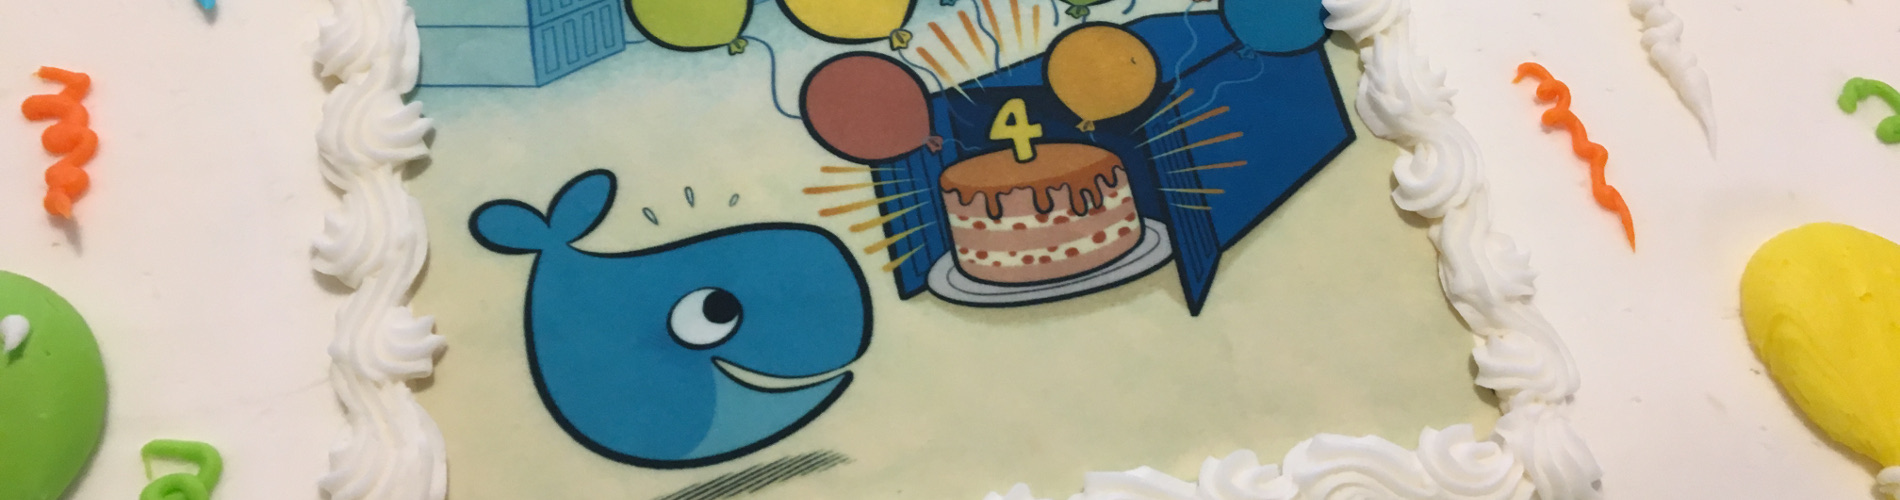 Docker's Birthday: The Fourth Kind feature image